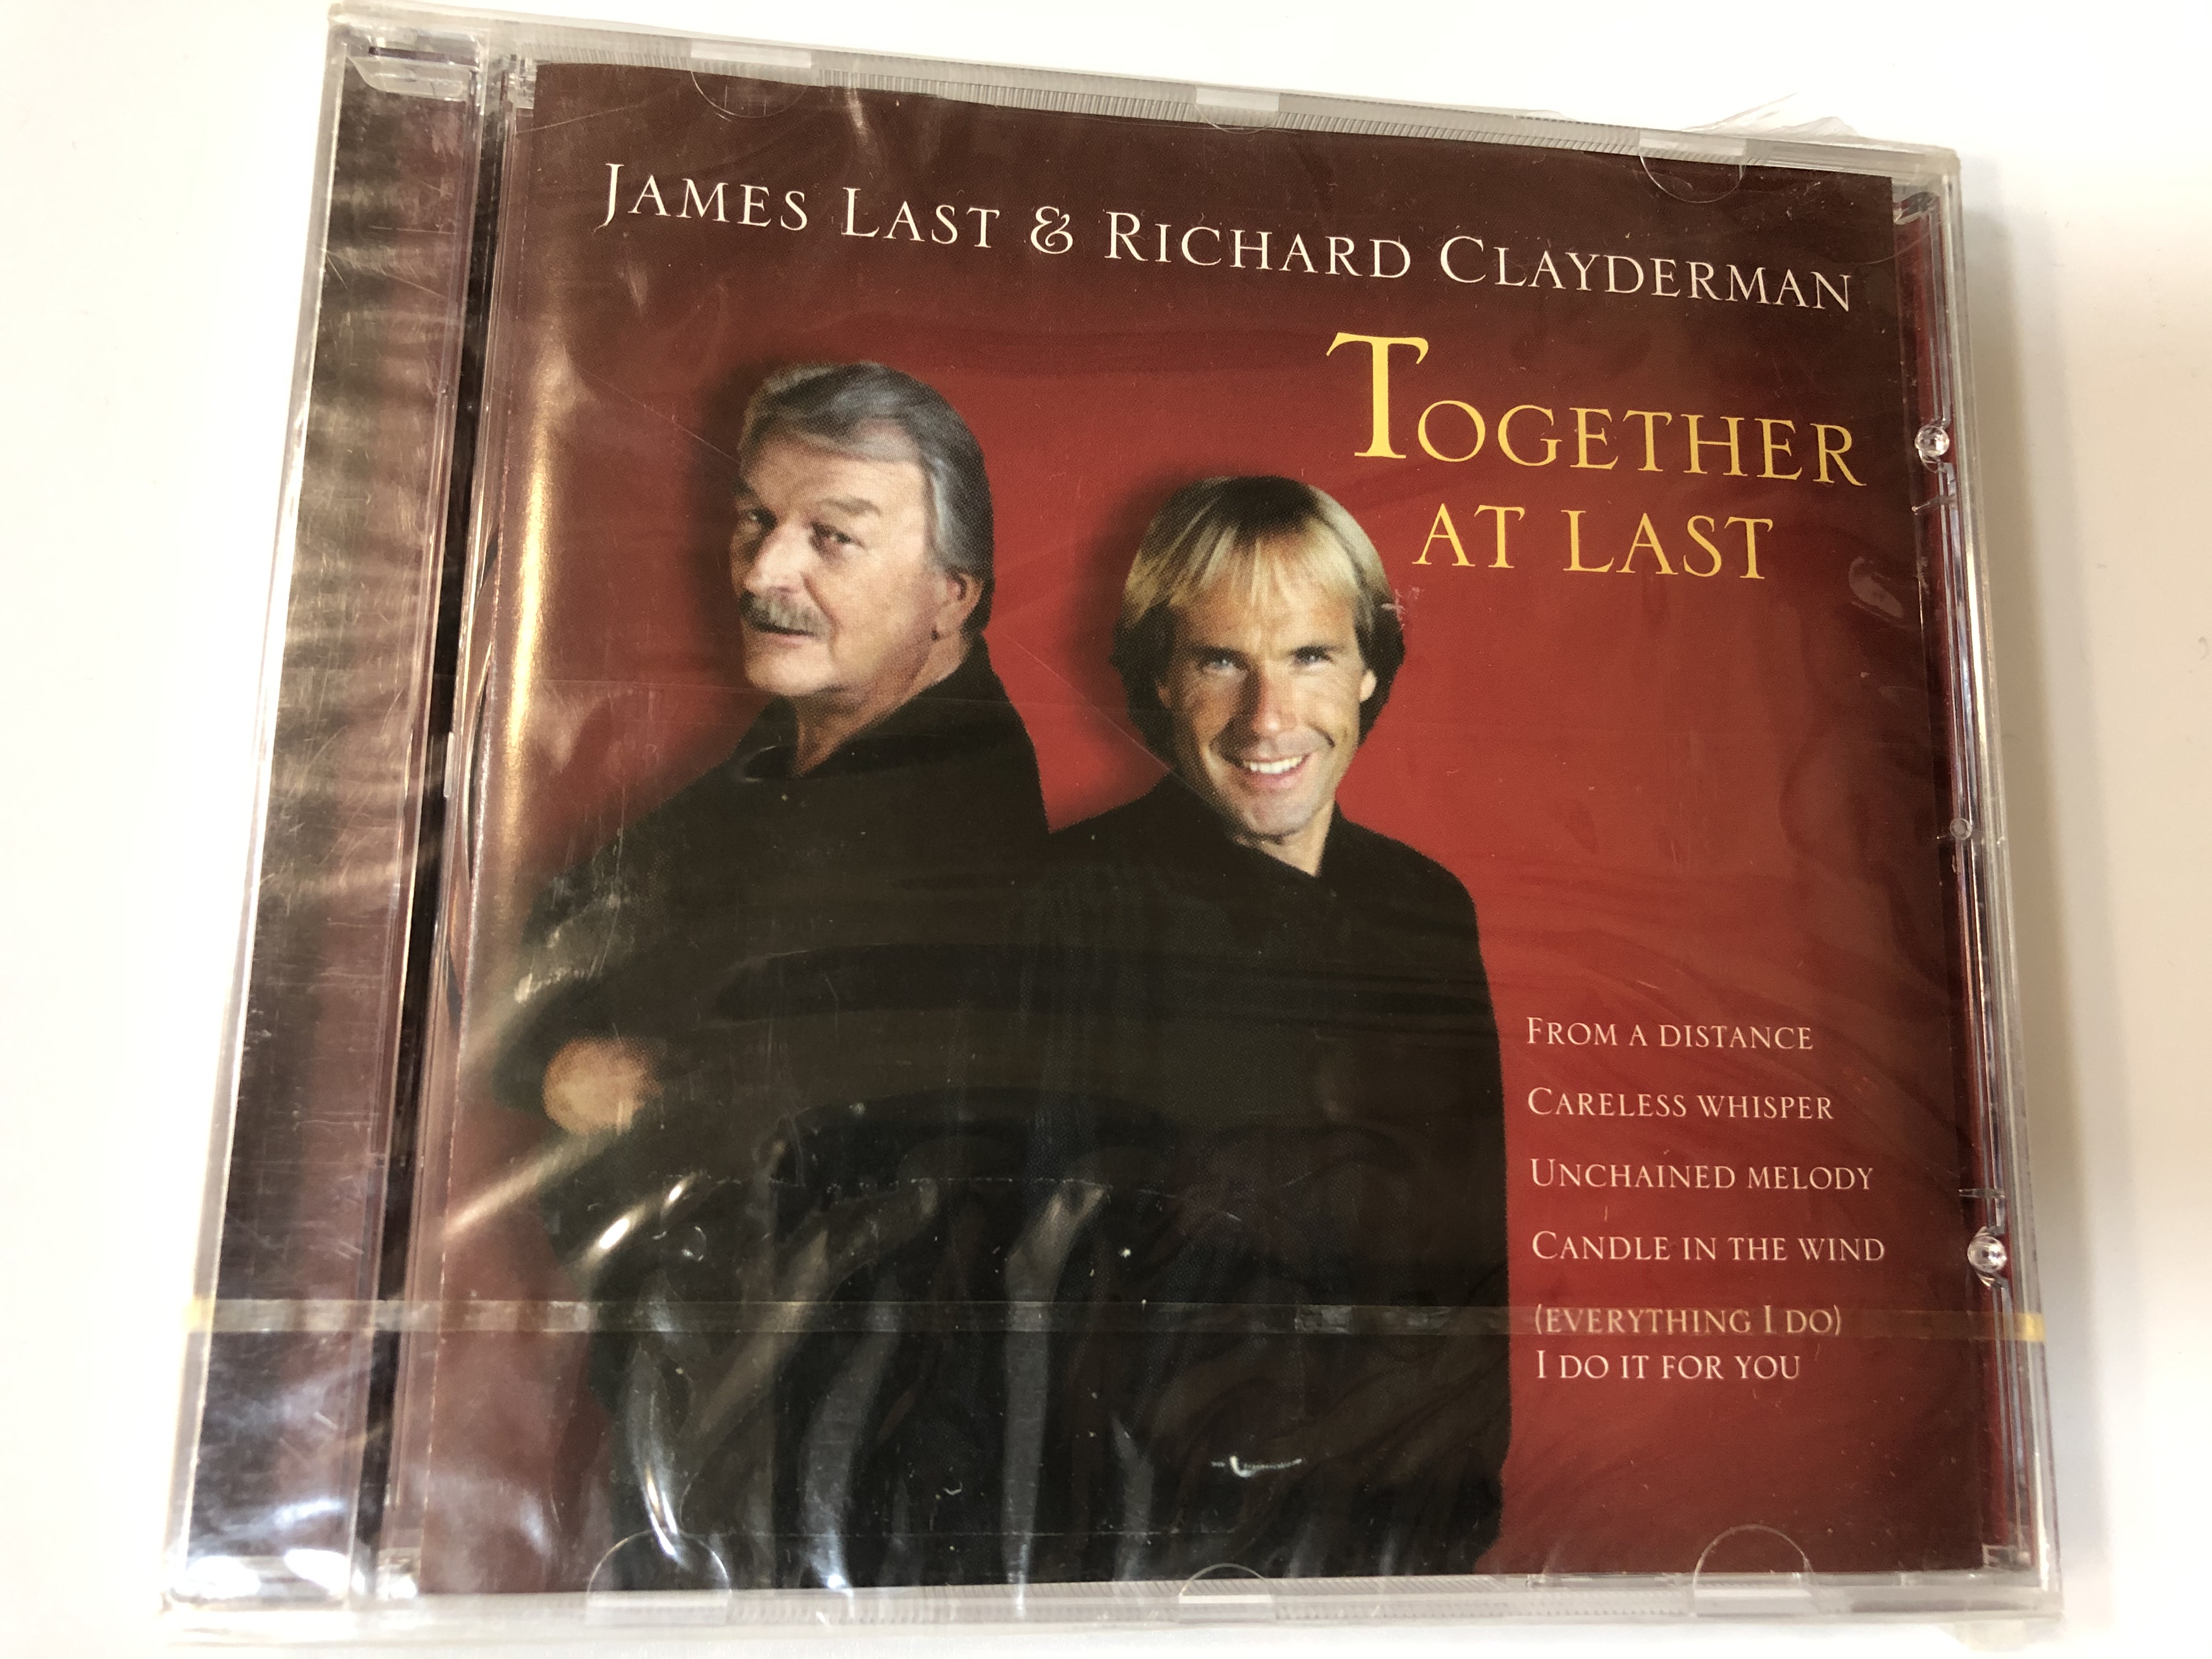 james-last-richard-clayderman-together-at-last-from-a-distance-careless-whisper-unchained-melody-candle-in-the-wind-everything-i-do-i-do-it-for-you-disky-audio-cd-2004-dc-901723-1-.jpg